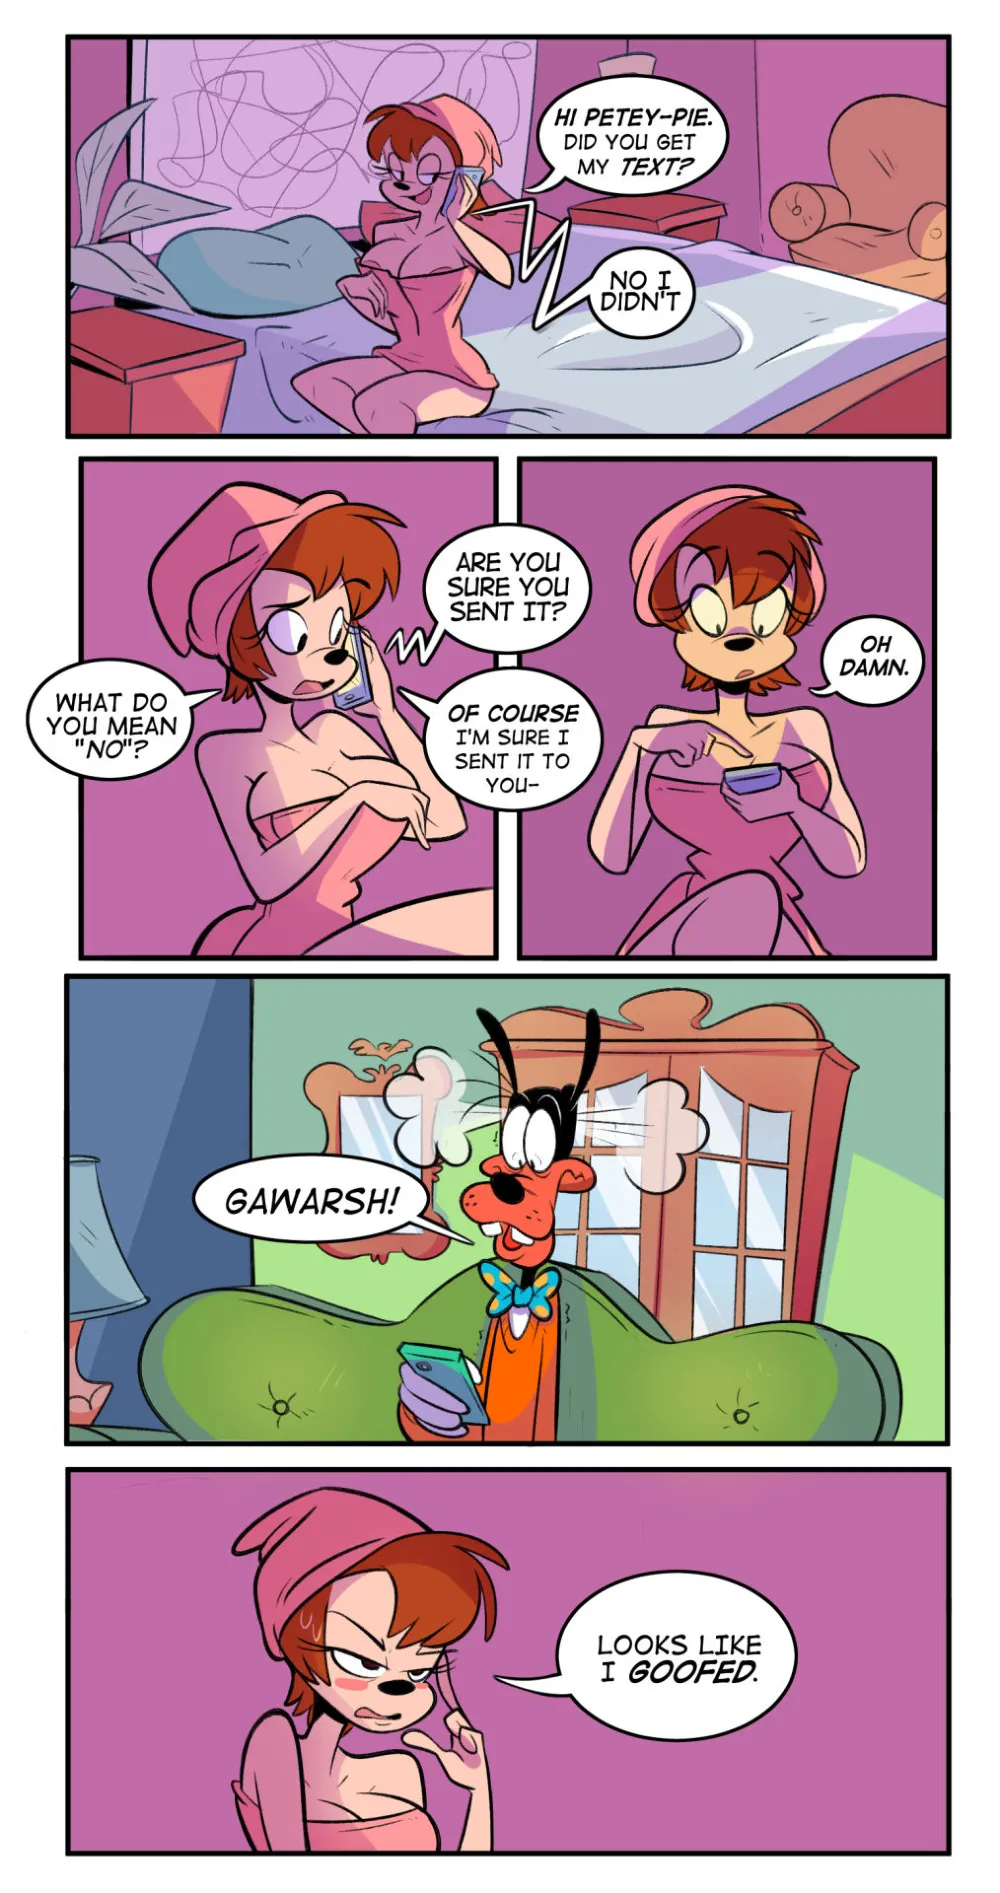 Goof Troop- She Goofed! [ThaMan] - Page 2